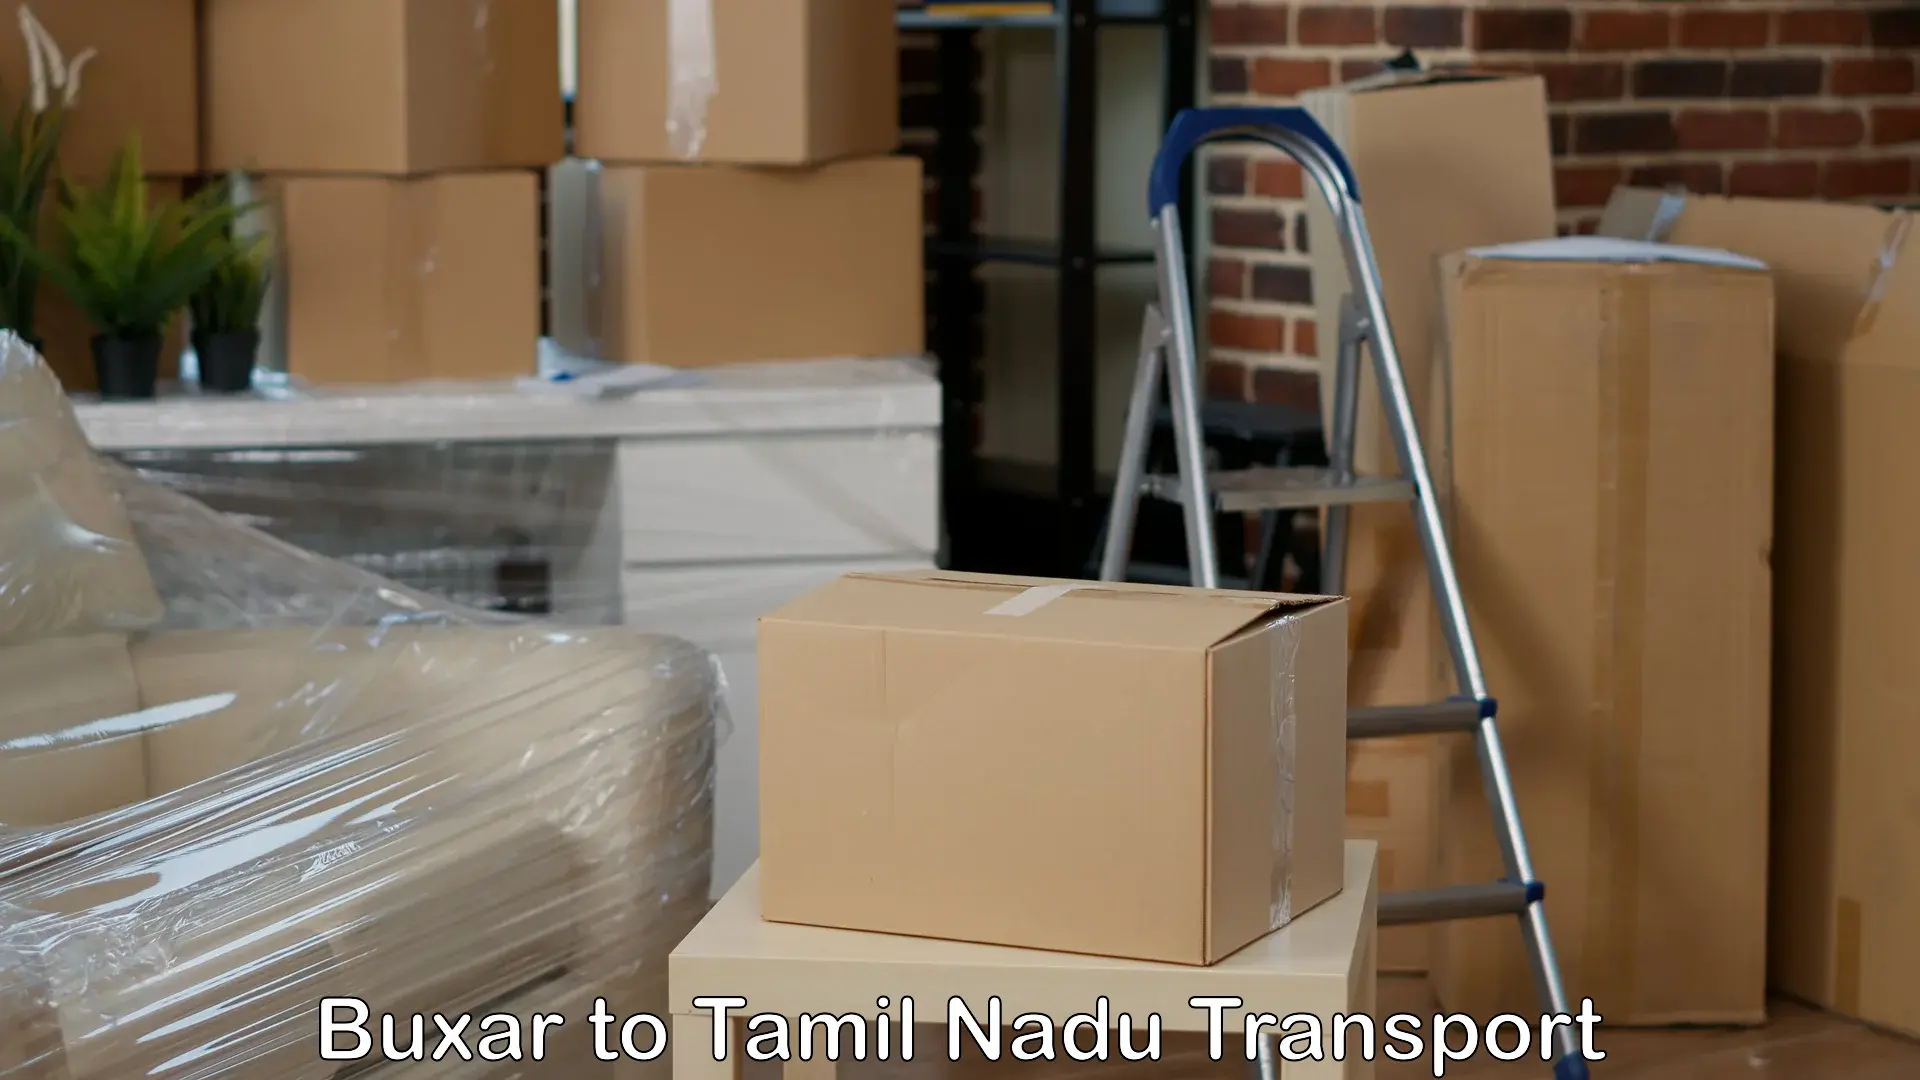 Goods delivery service Buxar to Cuddalore